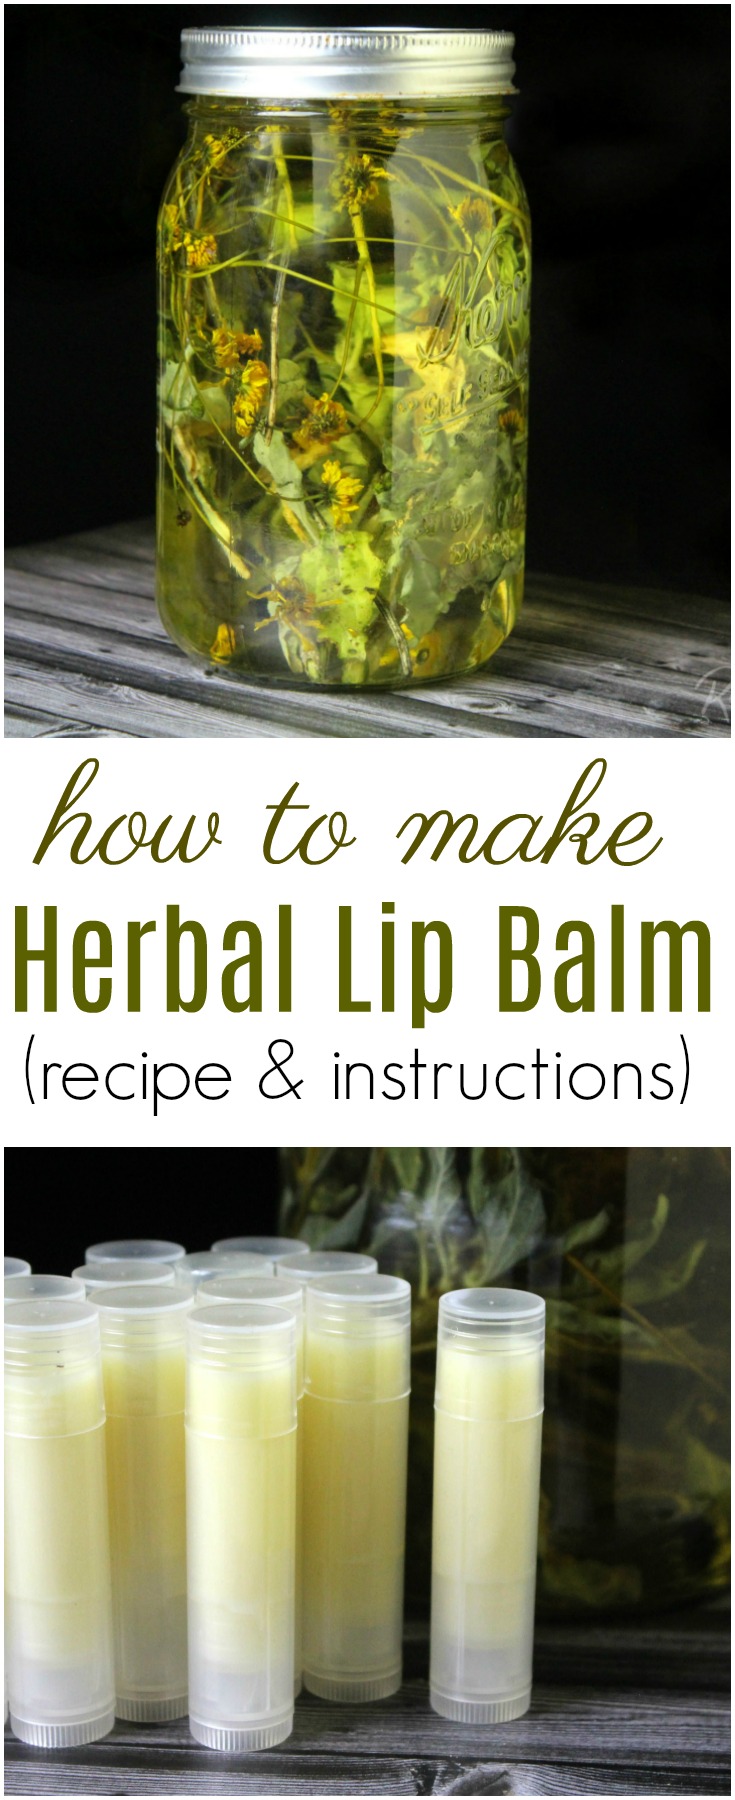 Learn how to make herbal lip balm using a simple yet flexible recipe of oils and skin-loving herbs.  This DIY makes a wonderful winter project or gift idea!